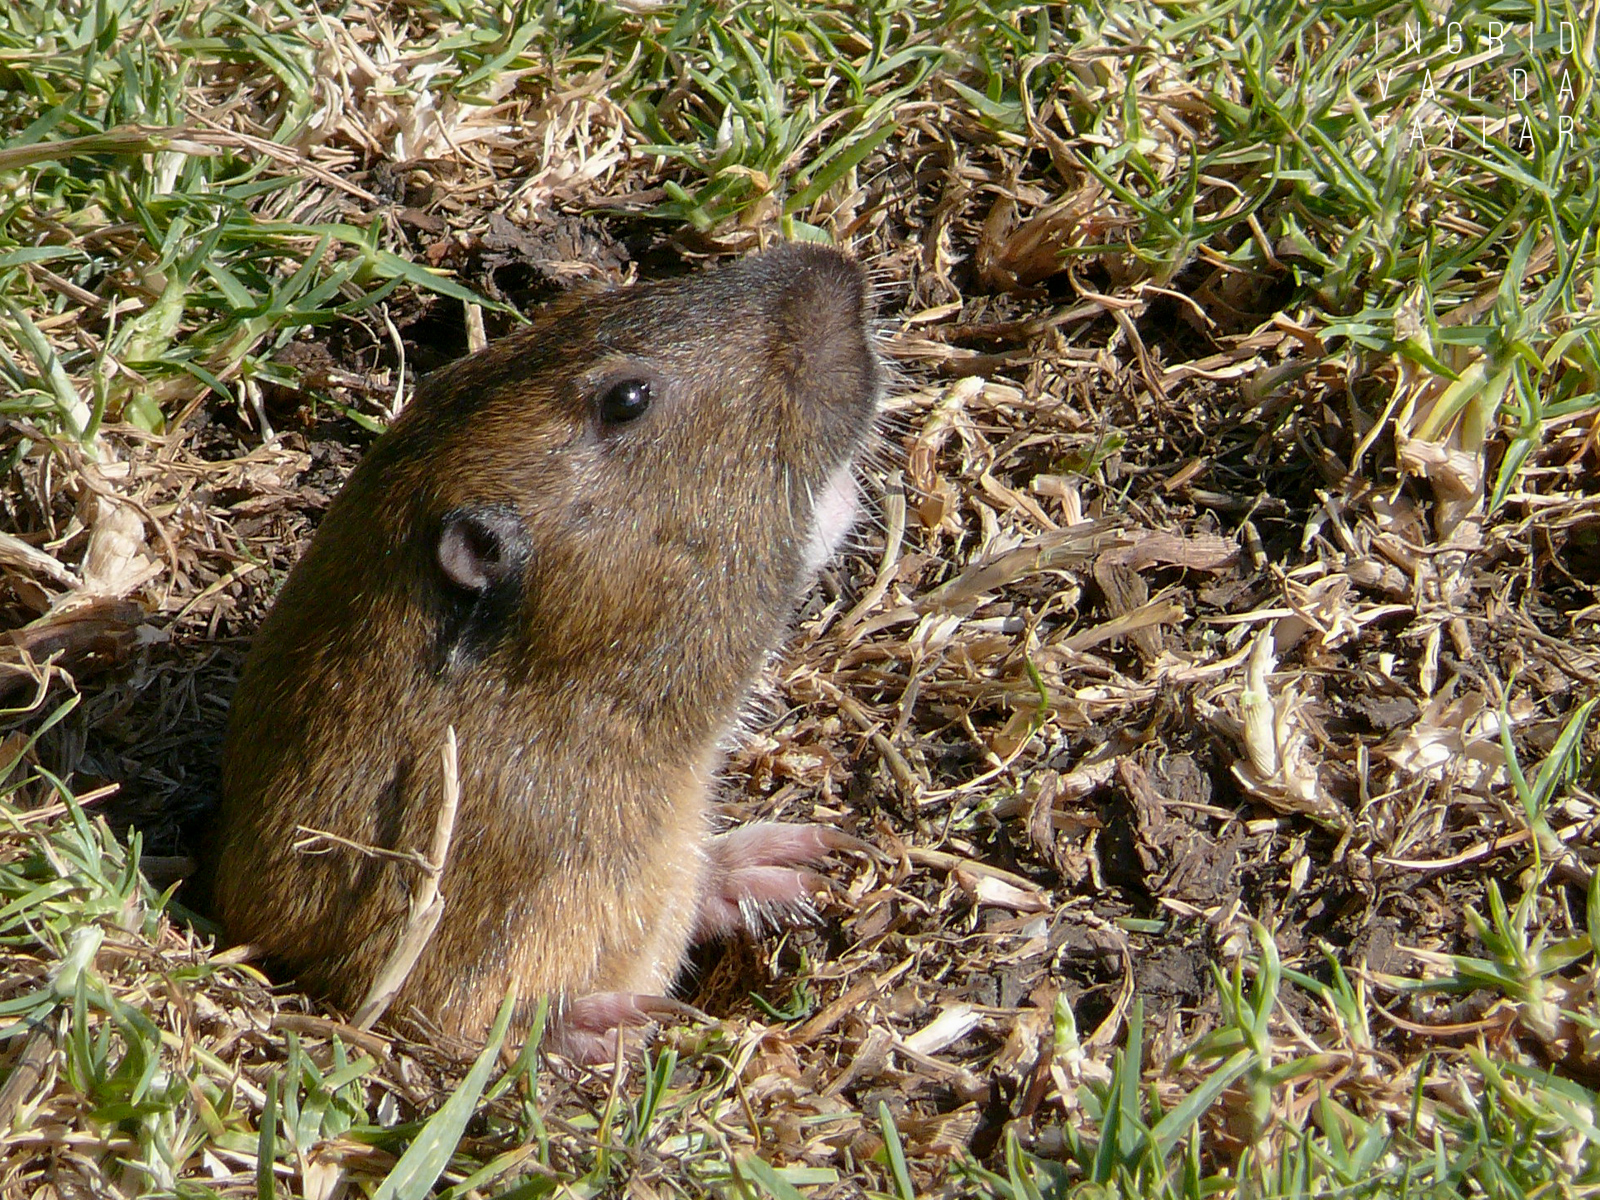 Pocket Gopher in Burrow